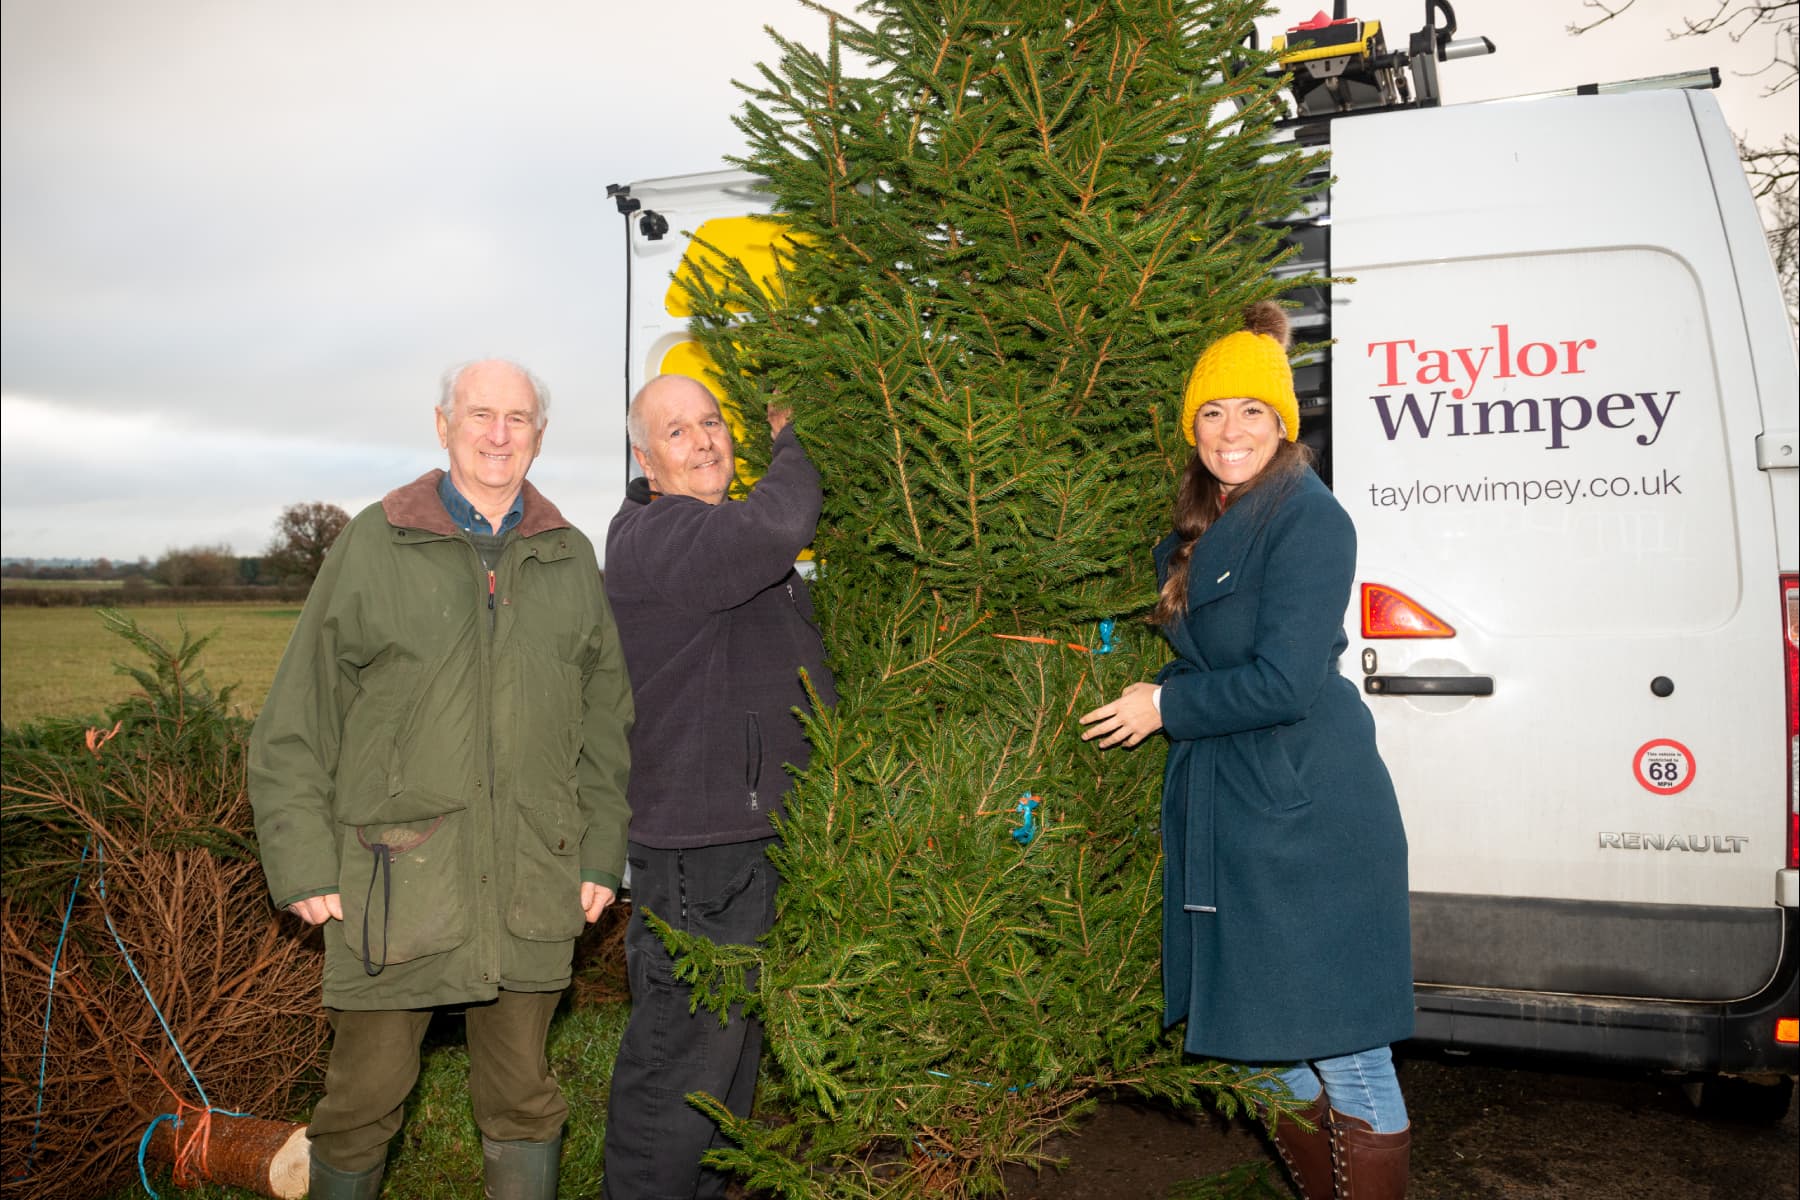 Delivering Christmas trees to Cumbria